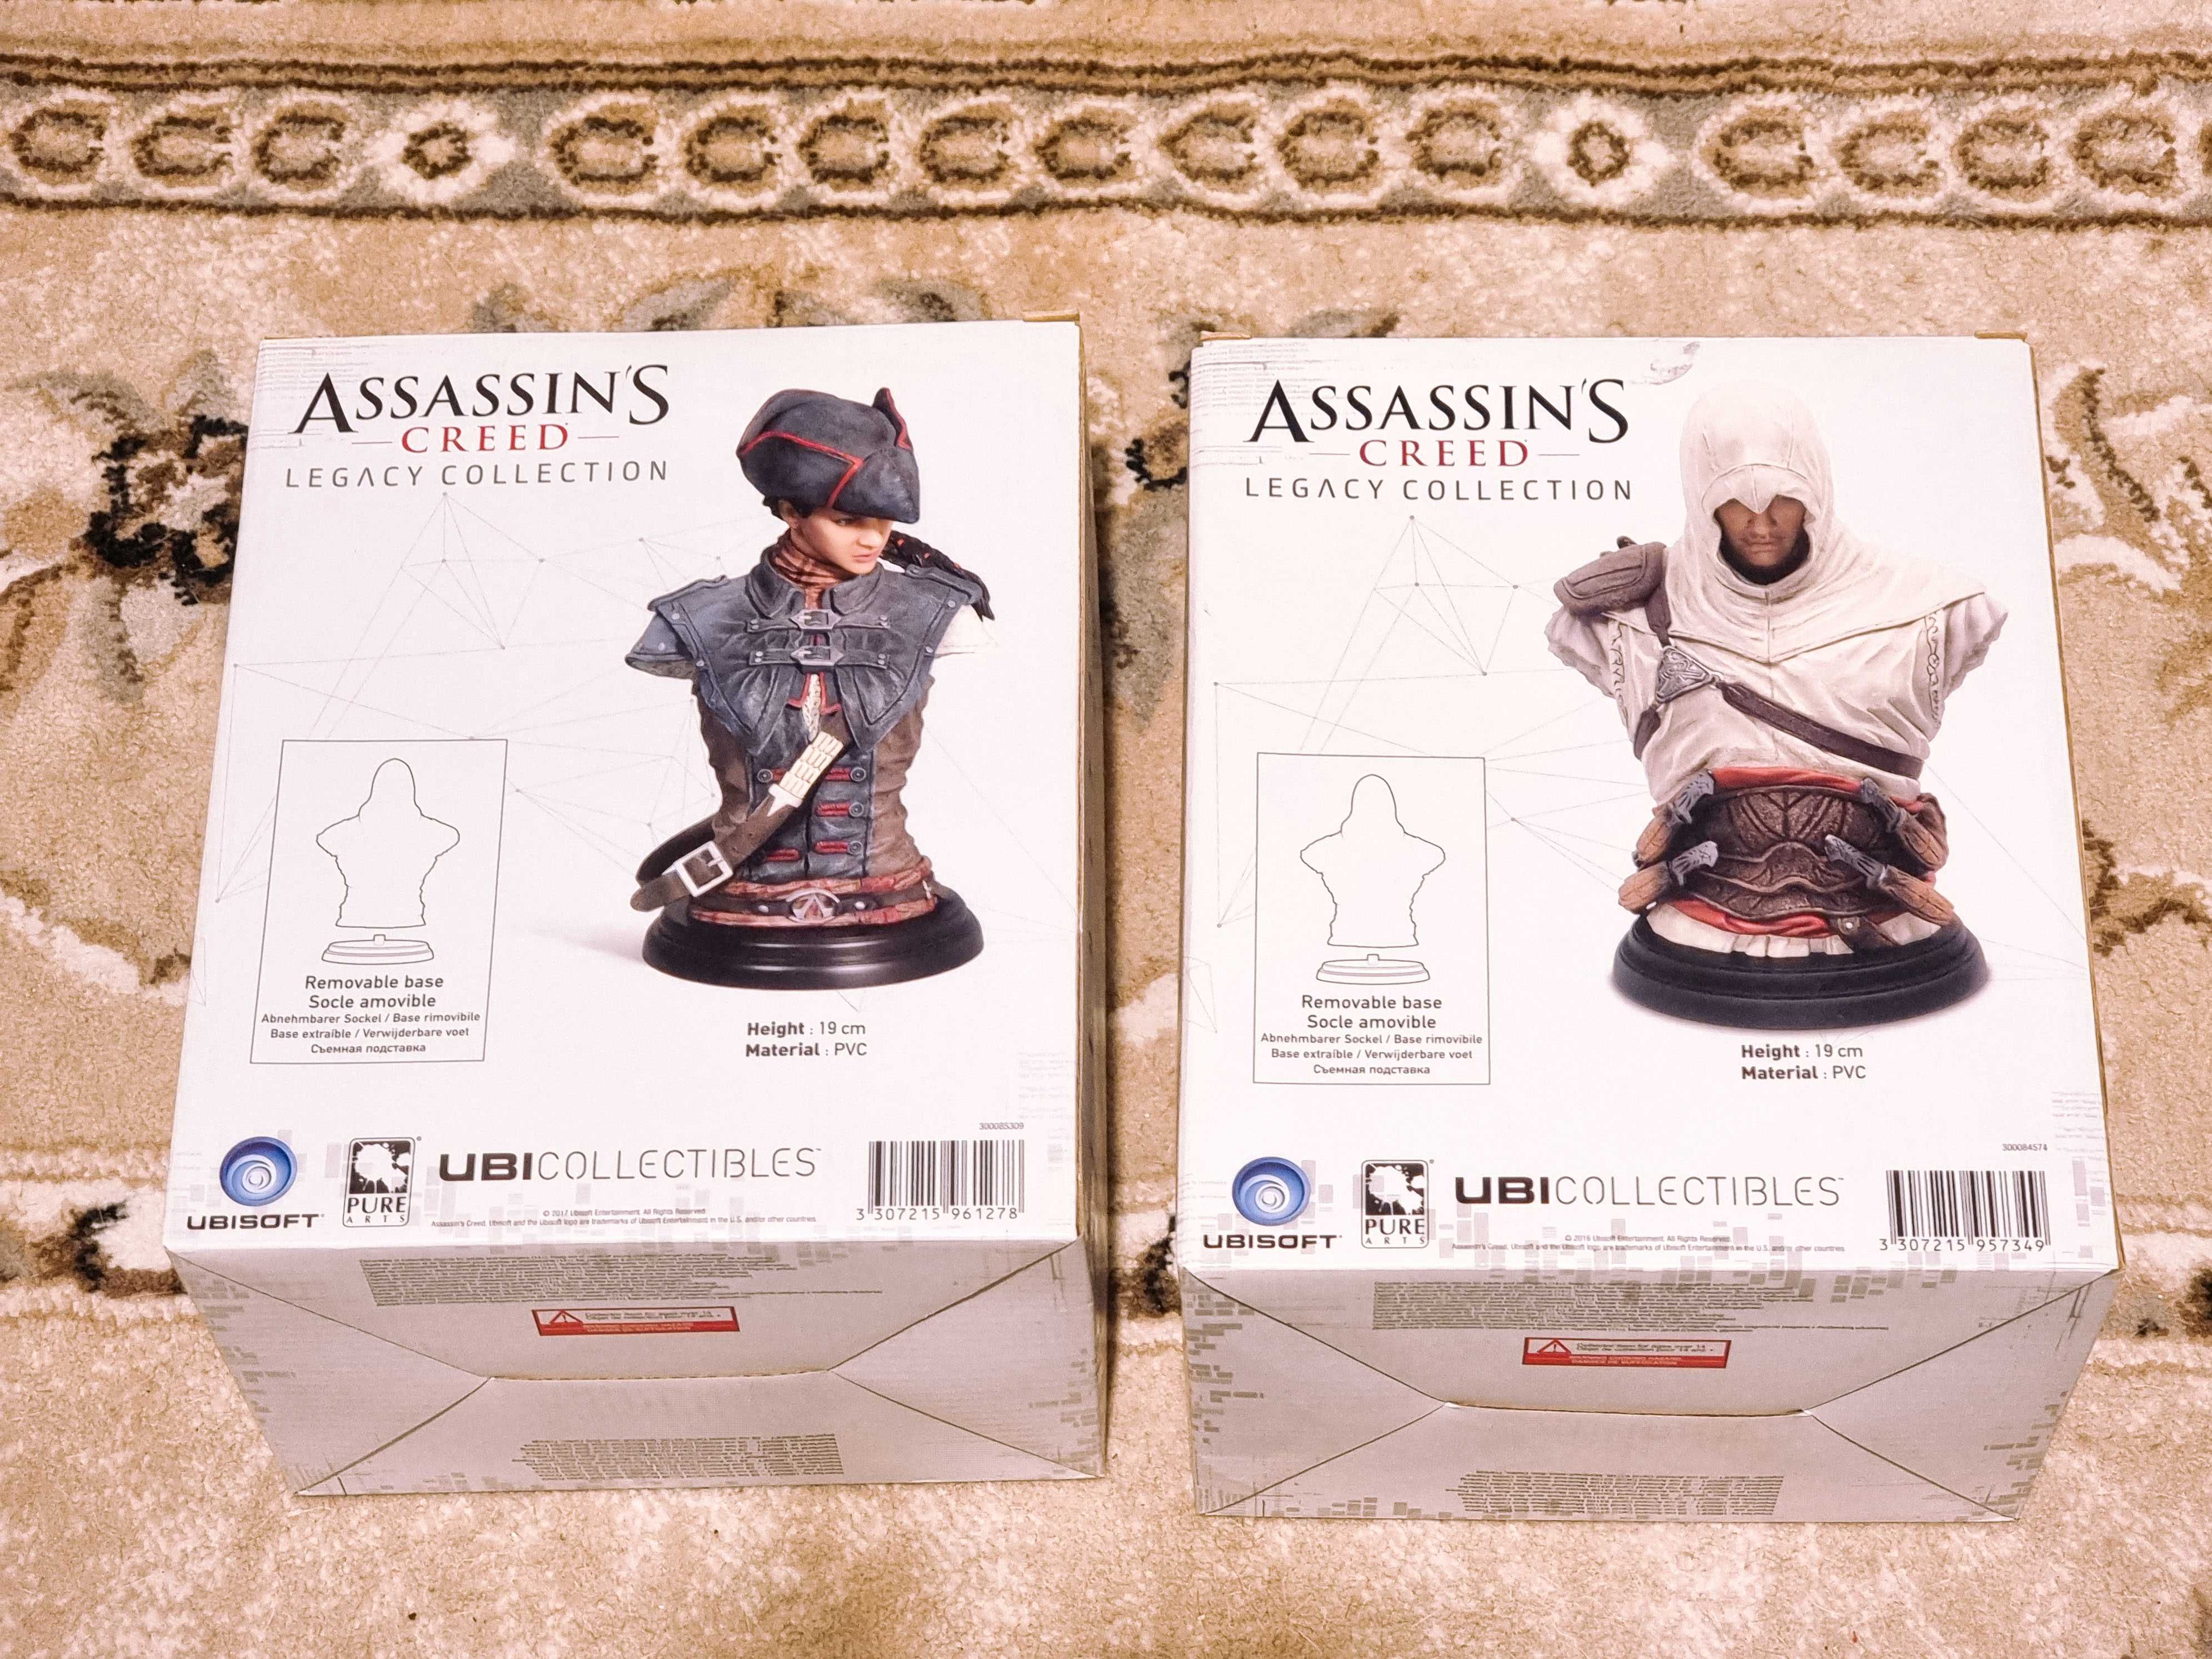 Assassins Creed Legacy Collectors Busts Aveline si Altair